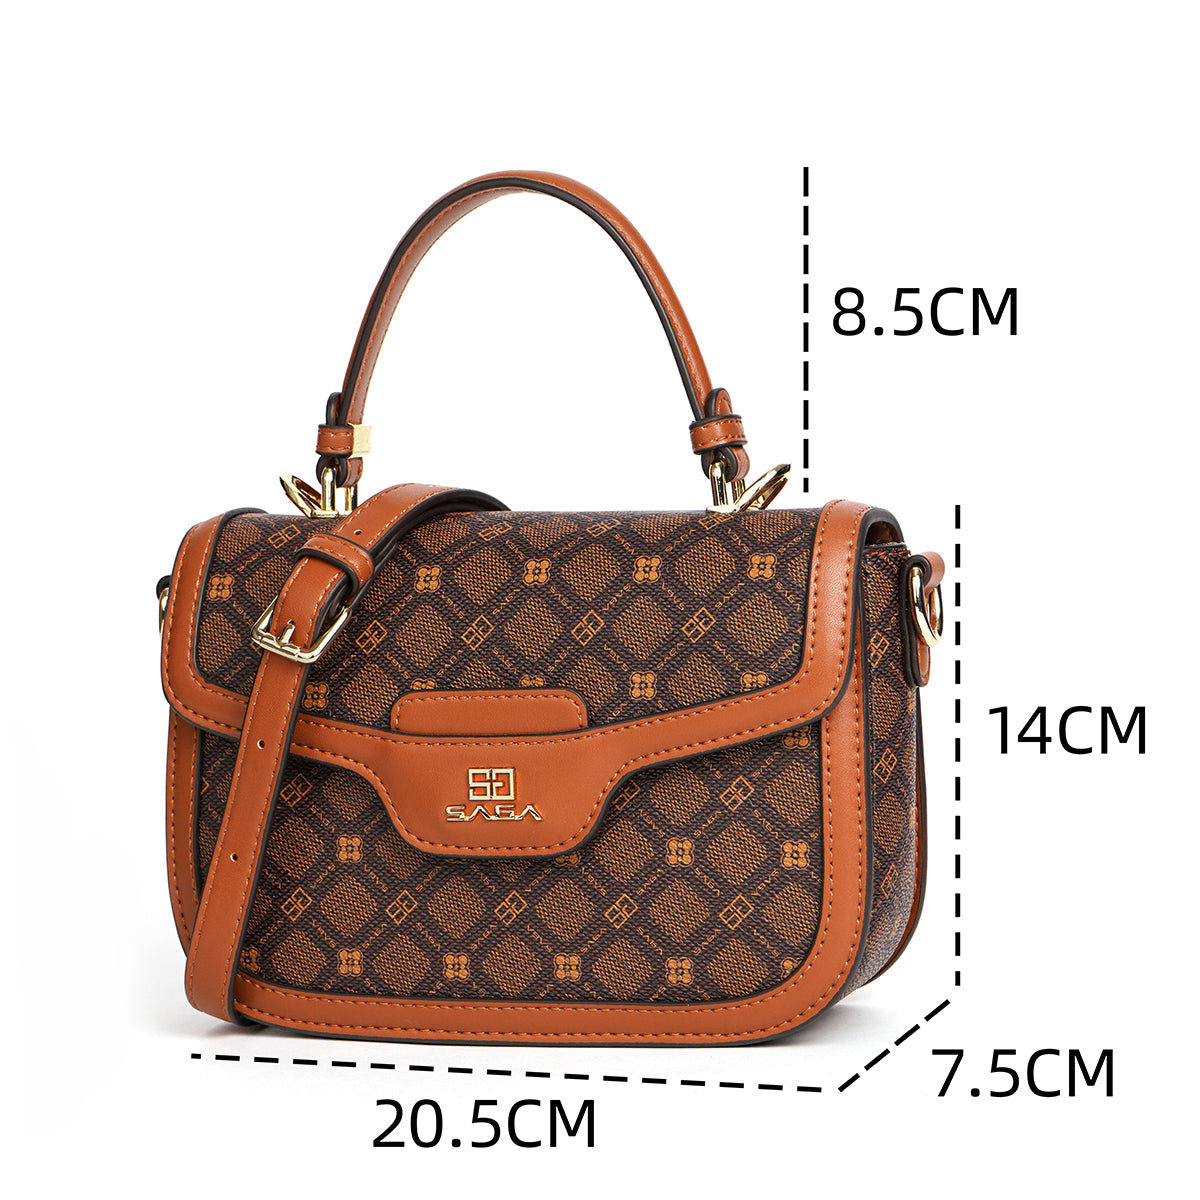 Handbag with shoulder strap stylish color available